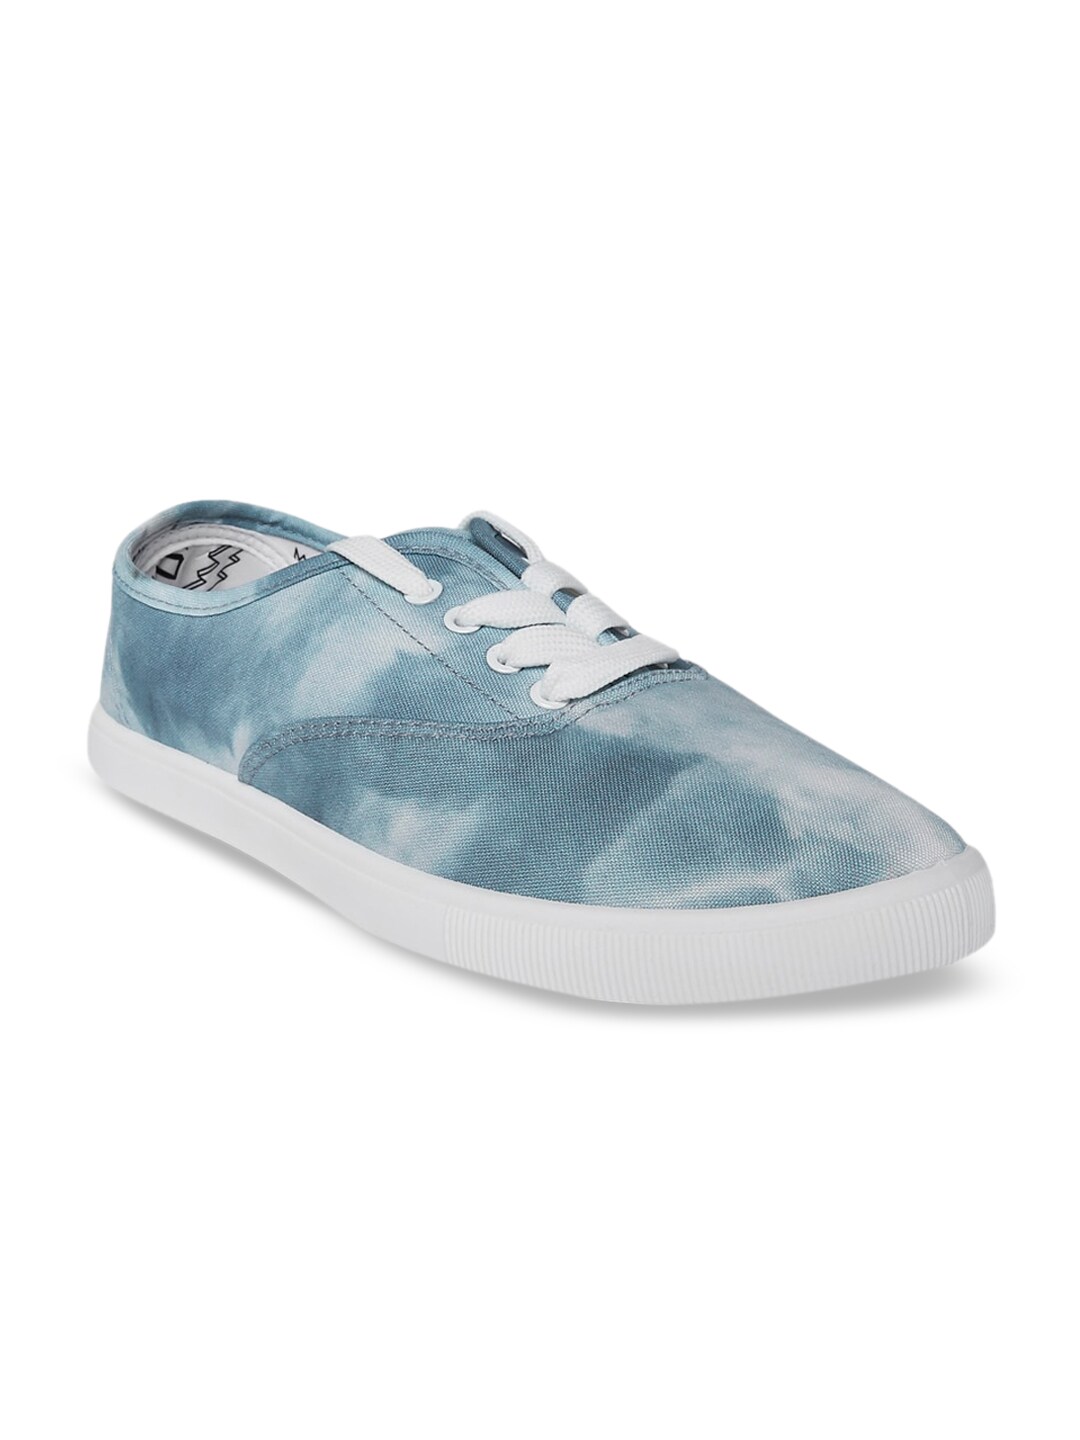 Forever Glam by Pantaloons Women Blue Printed Regular Sneakers Price in India